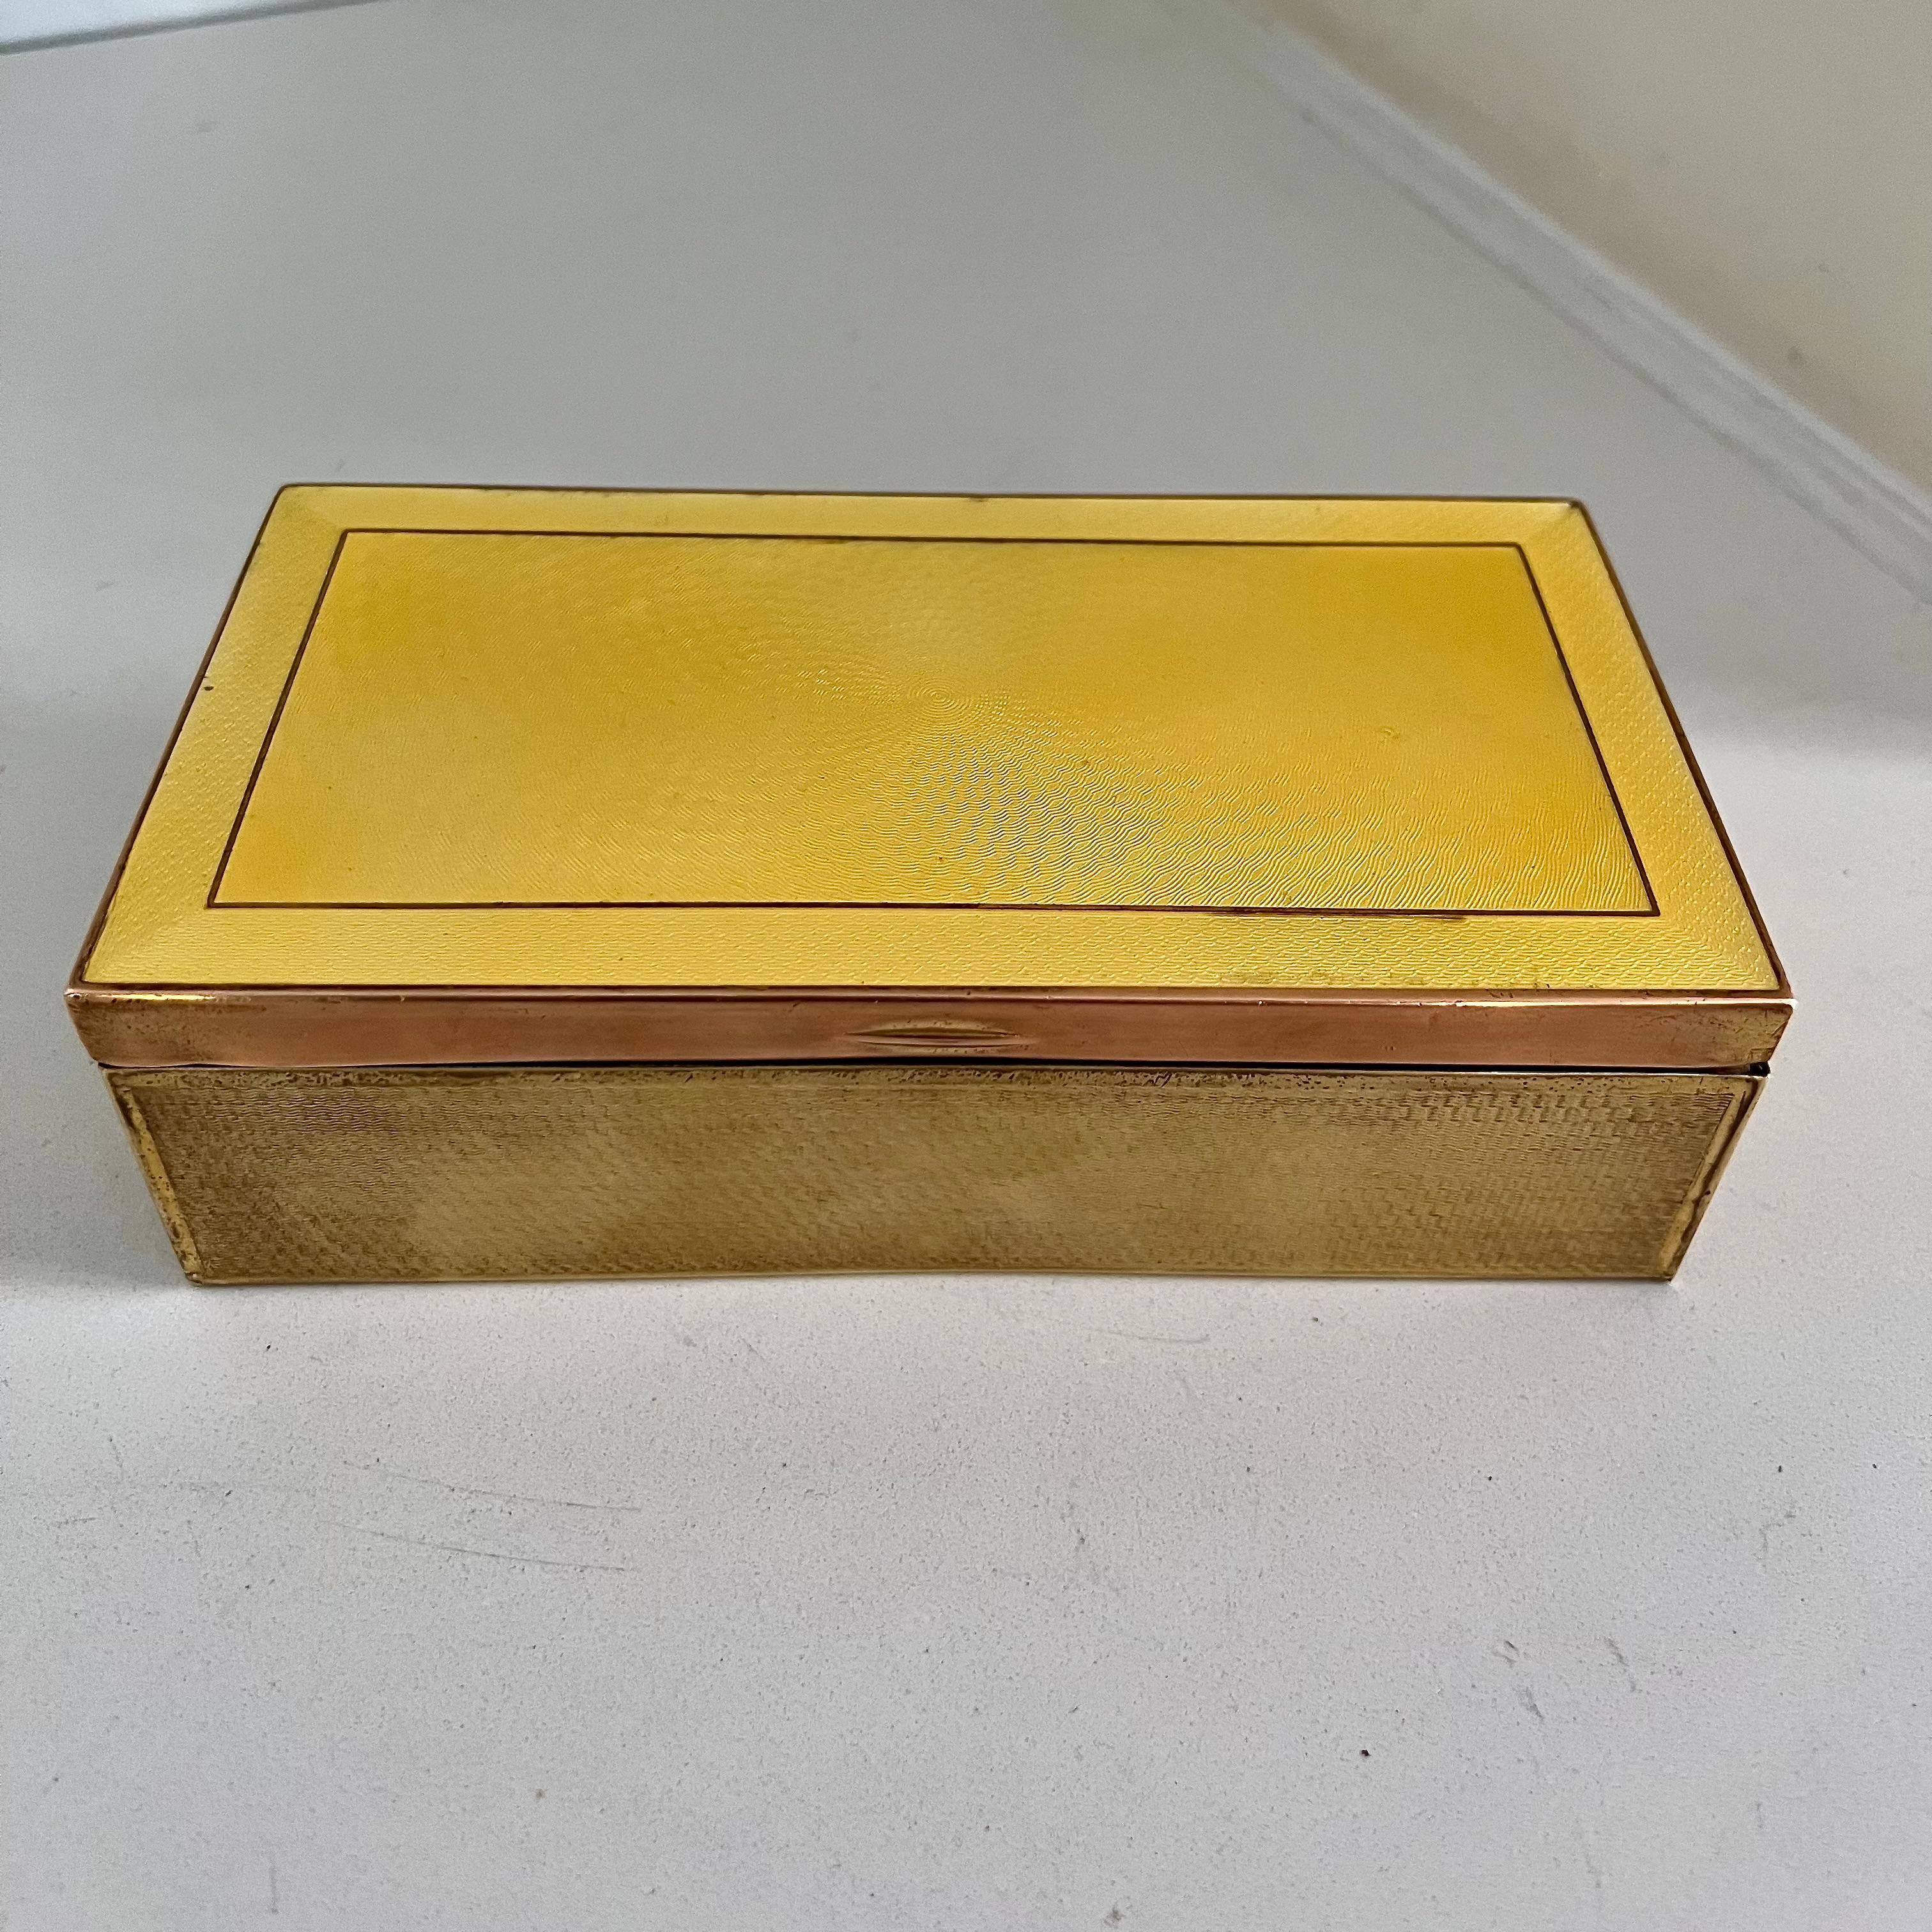 Hypnotic patinated Patterned brass with yellow guilloche enamel lid... This piece looks great bedside, on bookshelves and side tables, or perhaps the vanity. 

Wood lining and a well-oiled hinge. Be sure to watch the video to catch all the